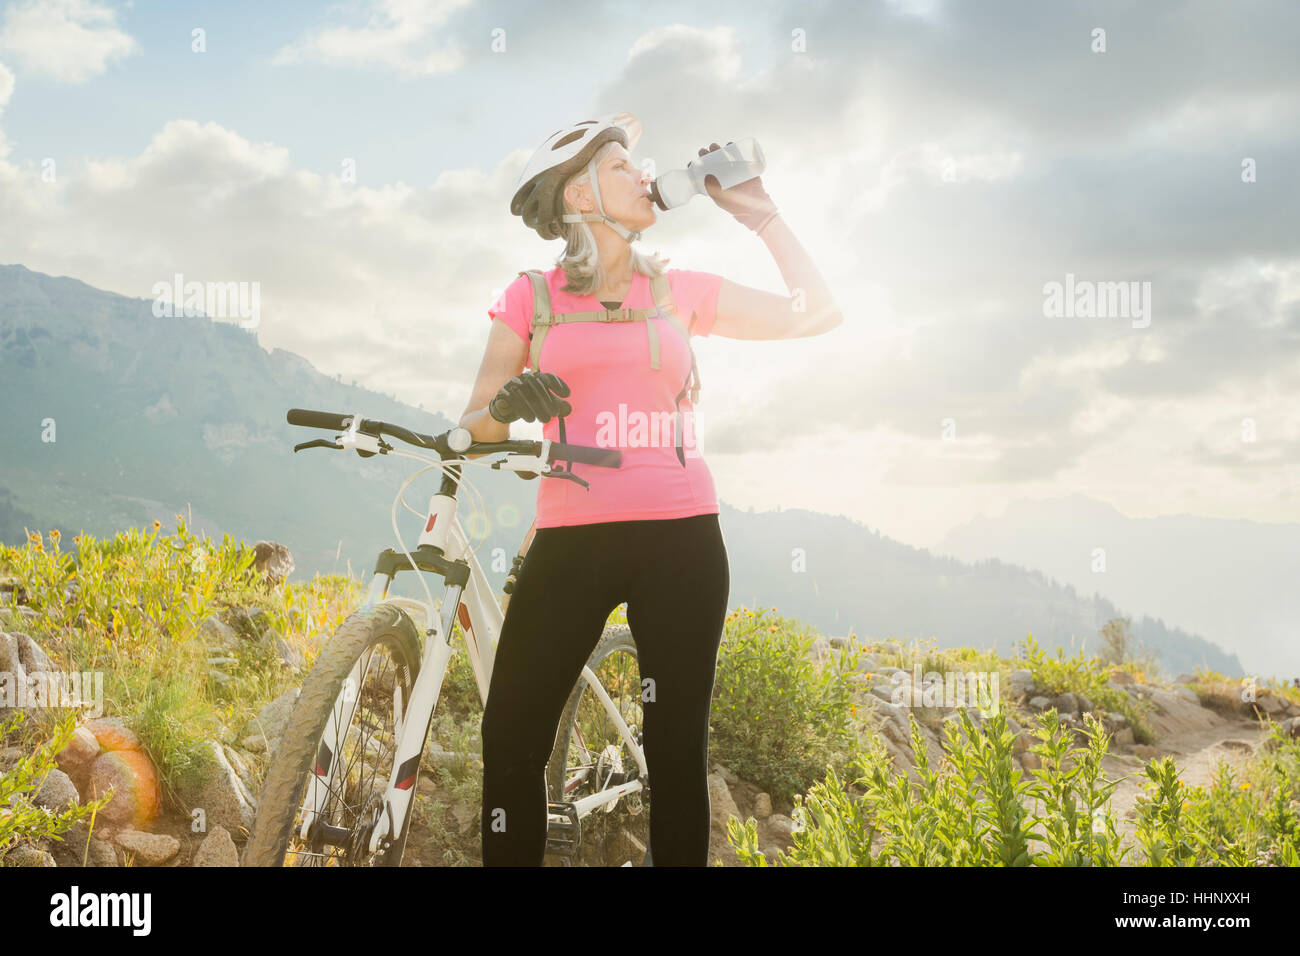 Caucasian woman with mountain bike drinking from bottle Stock Photo